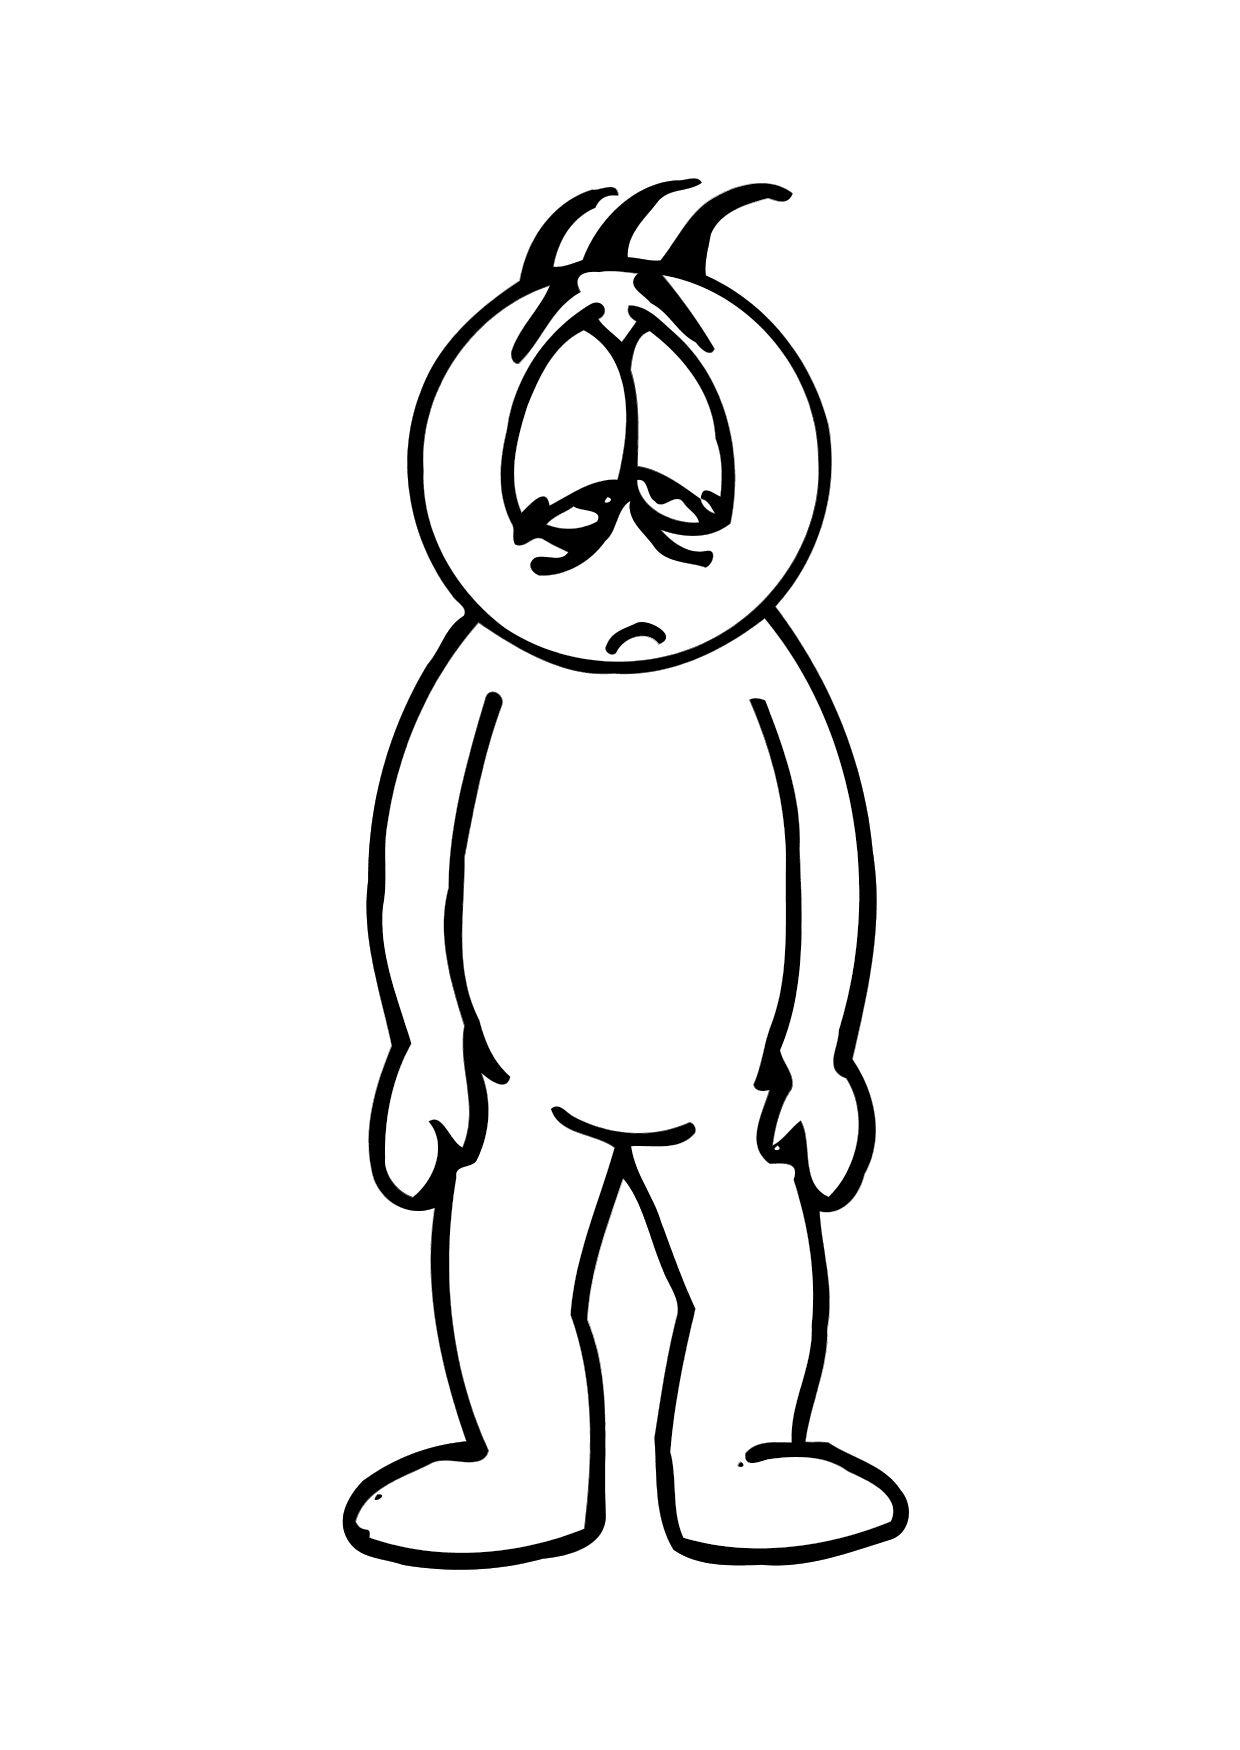 Coloring page 09b. tired